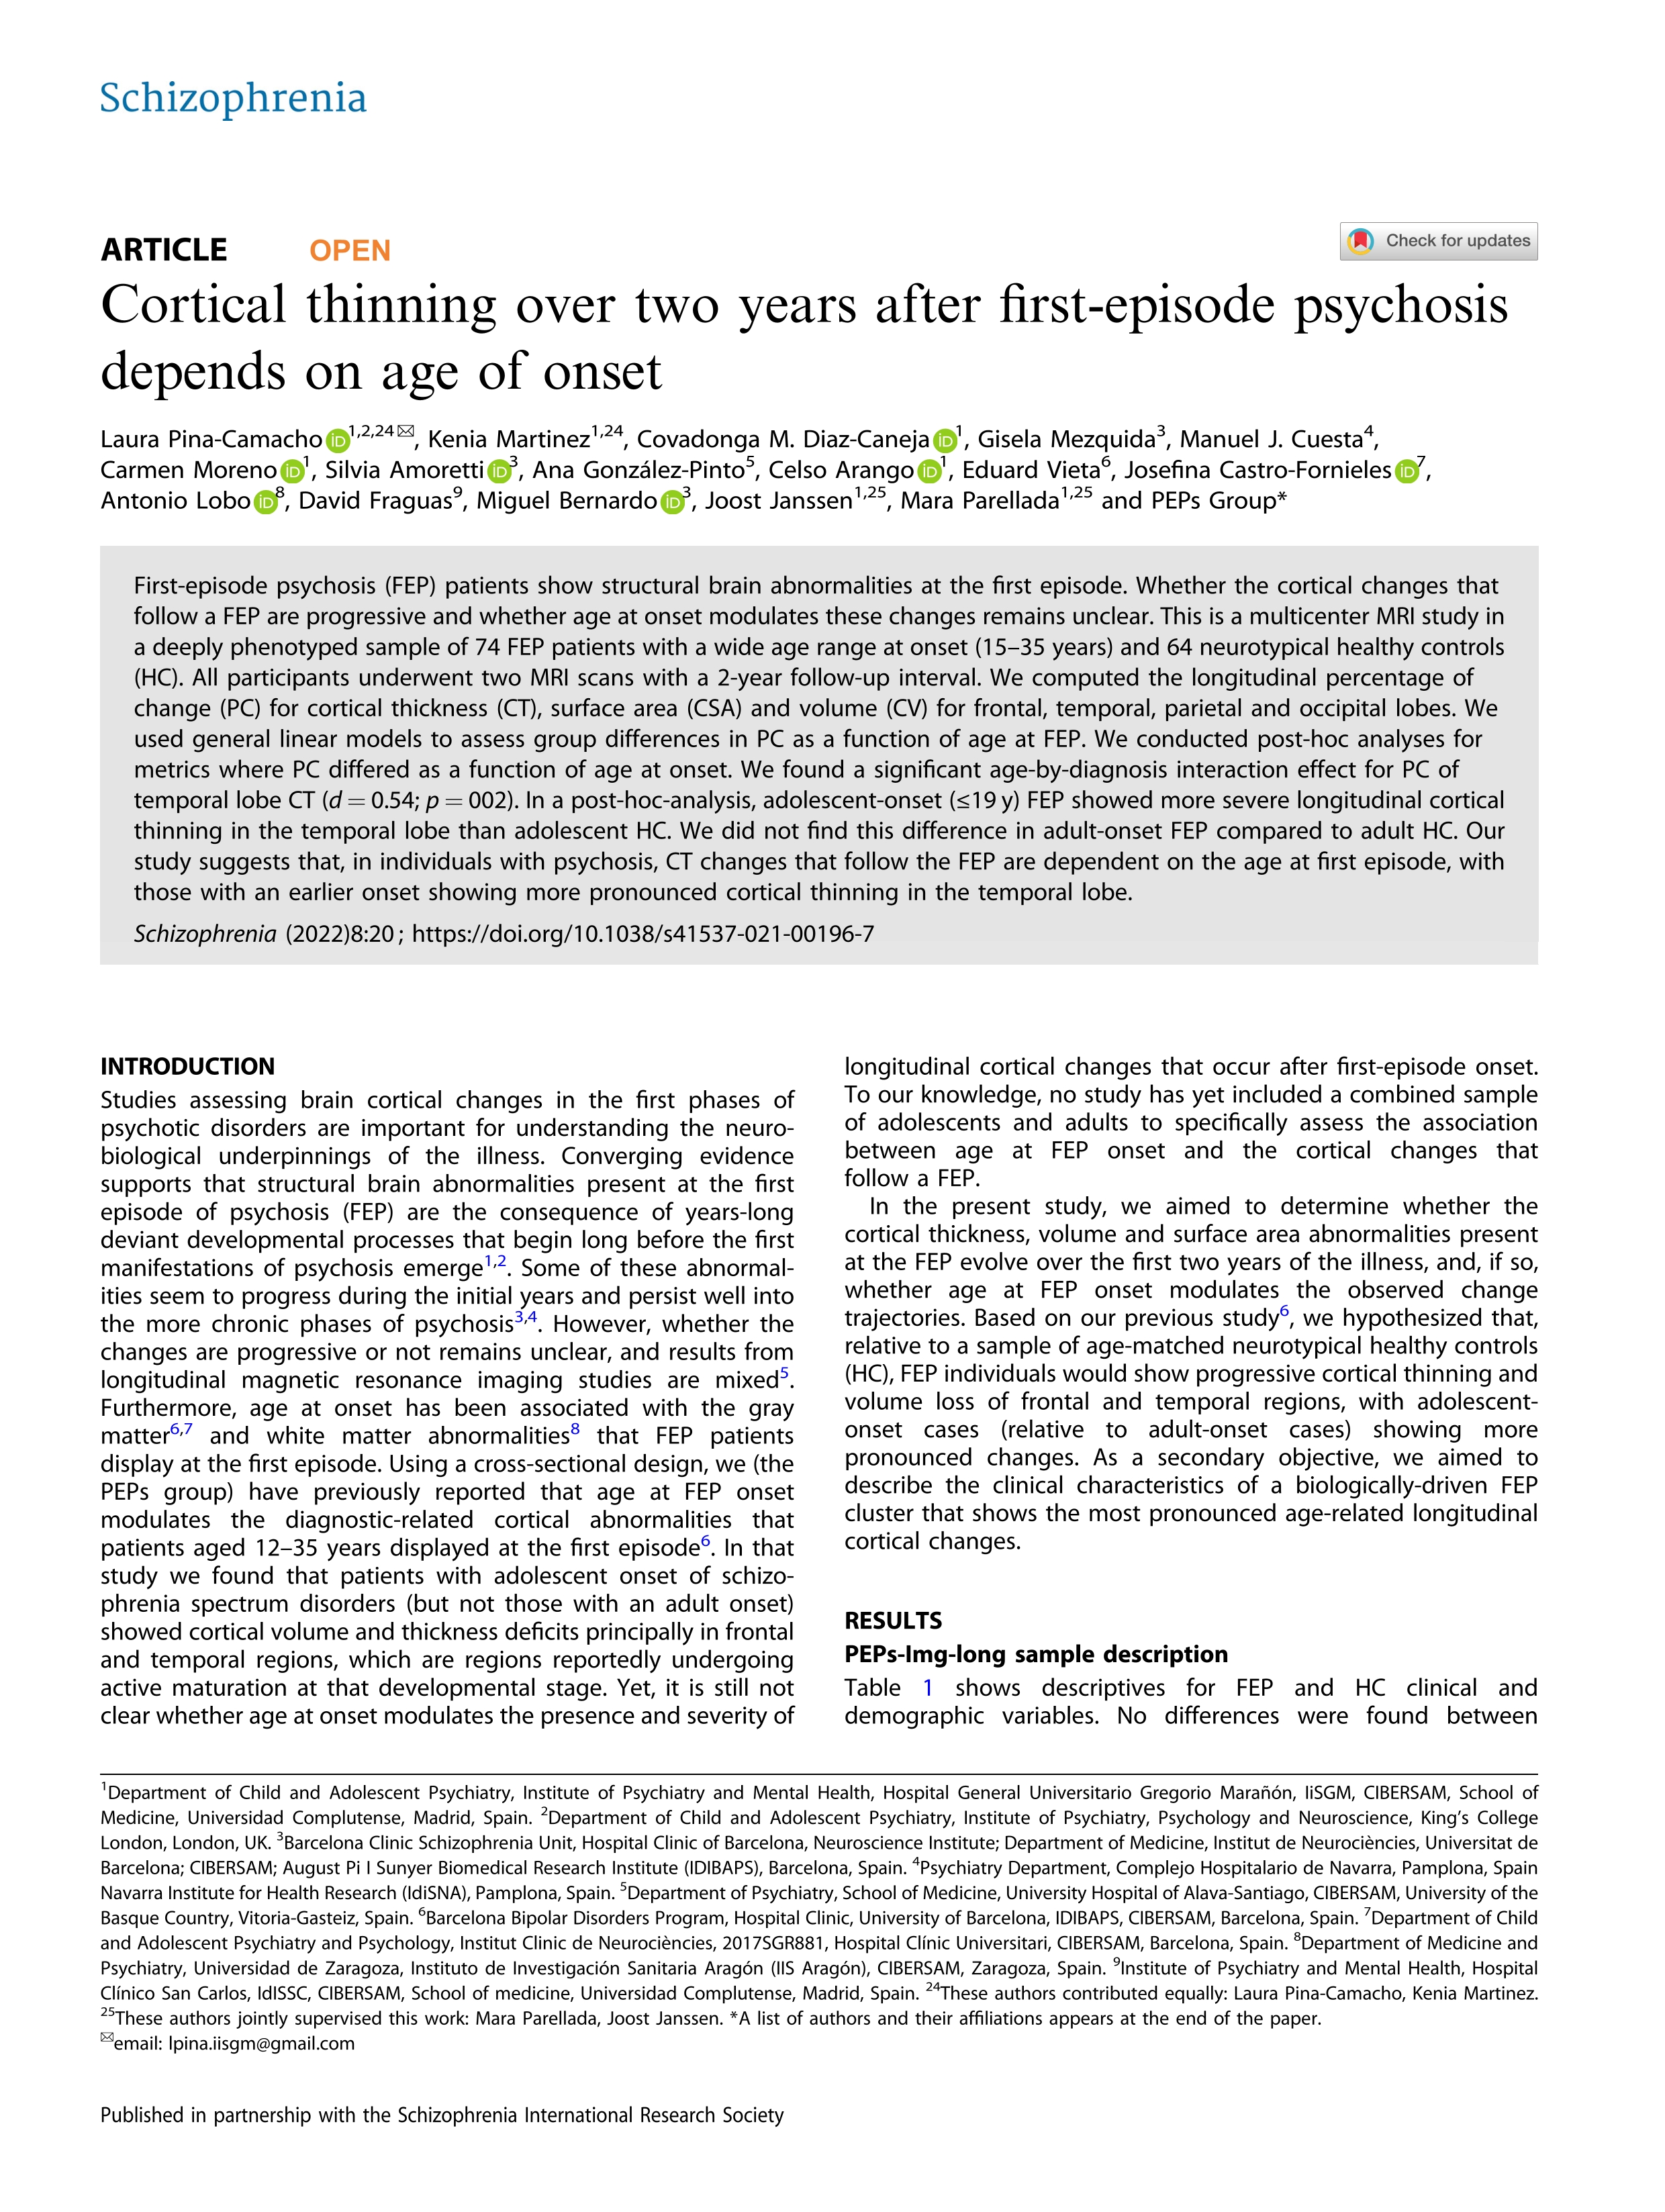 Cortical thinning over two years after first-episode psychosis depends on age of onset